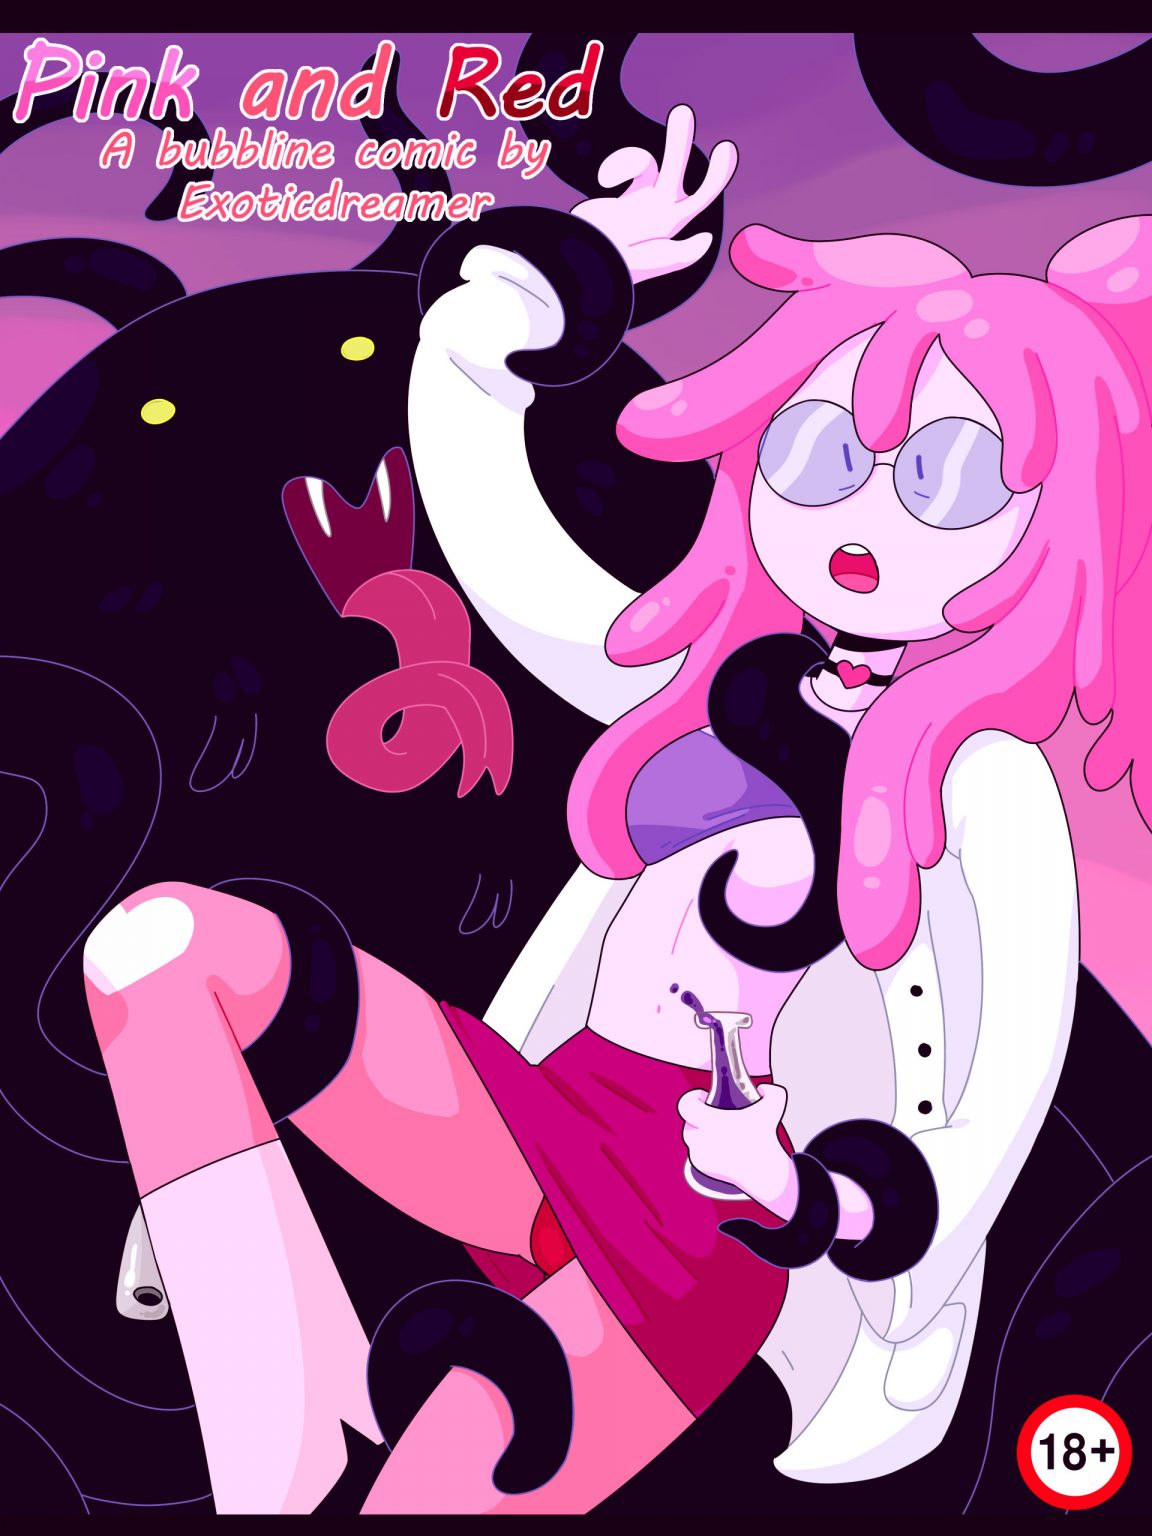 Pink and red bubbline porn comic picture 1